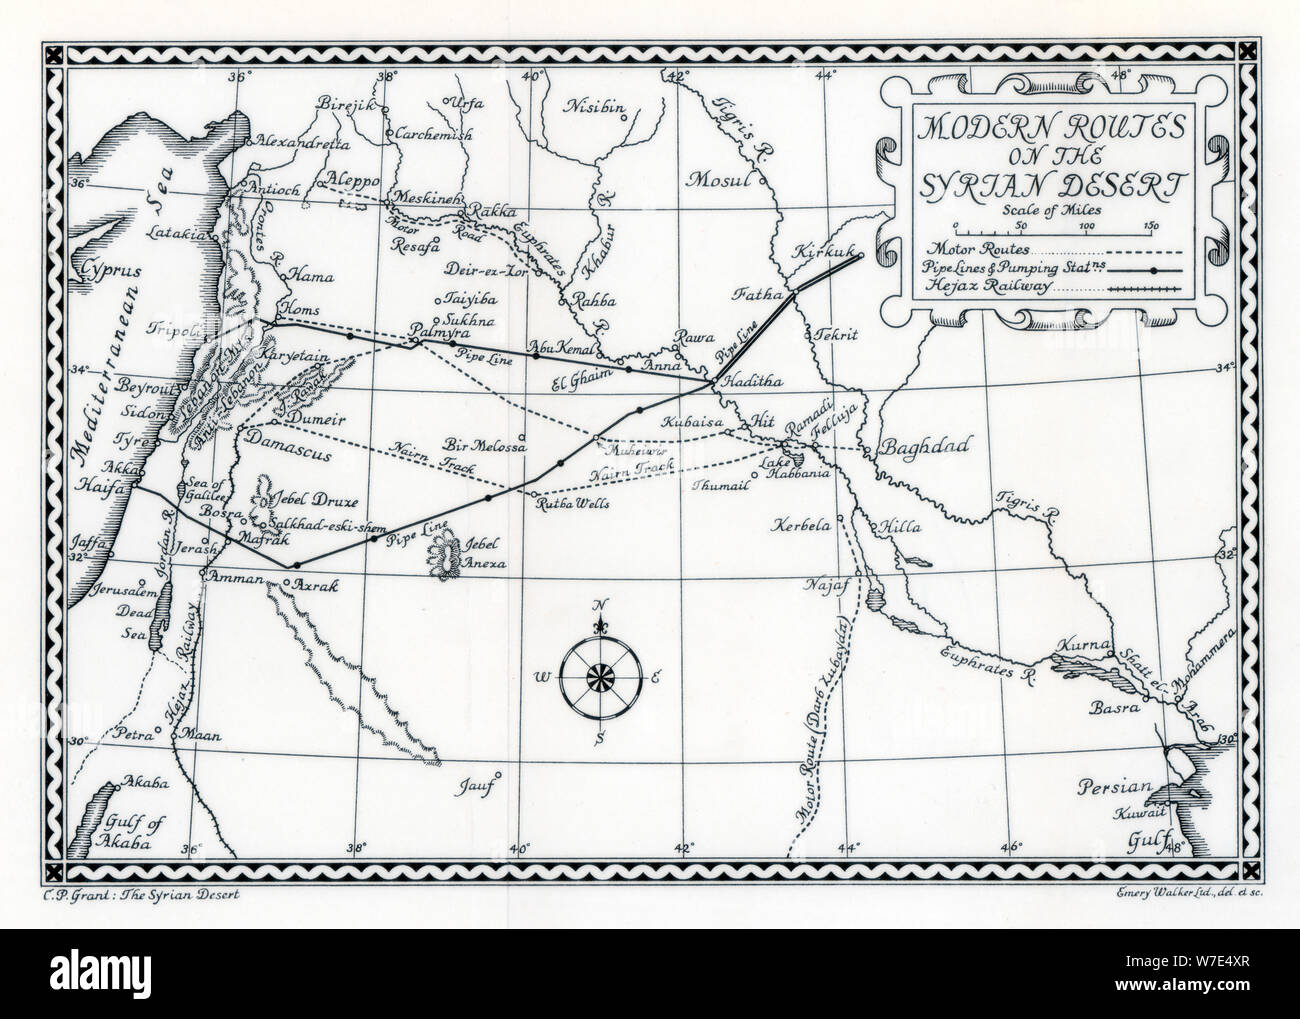 Railway and motor routes and pipelines, Syrian desert, 1937. Artist: Emery Walker Ltd Stock Photo